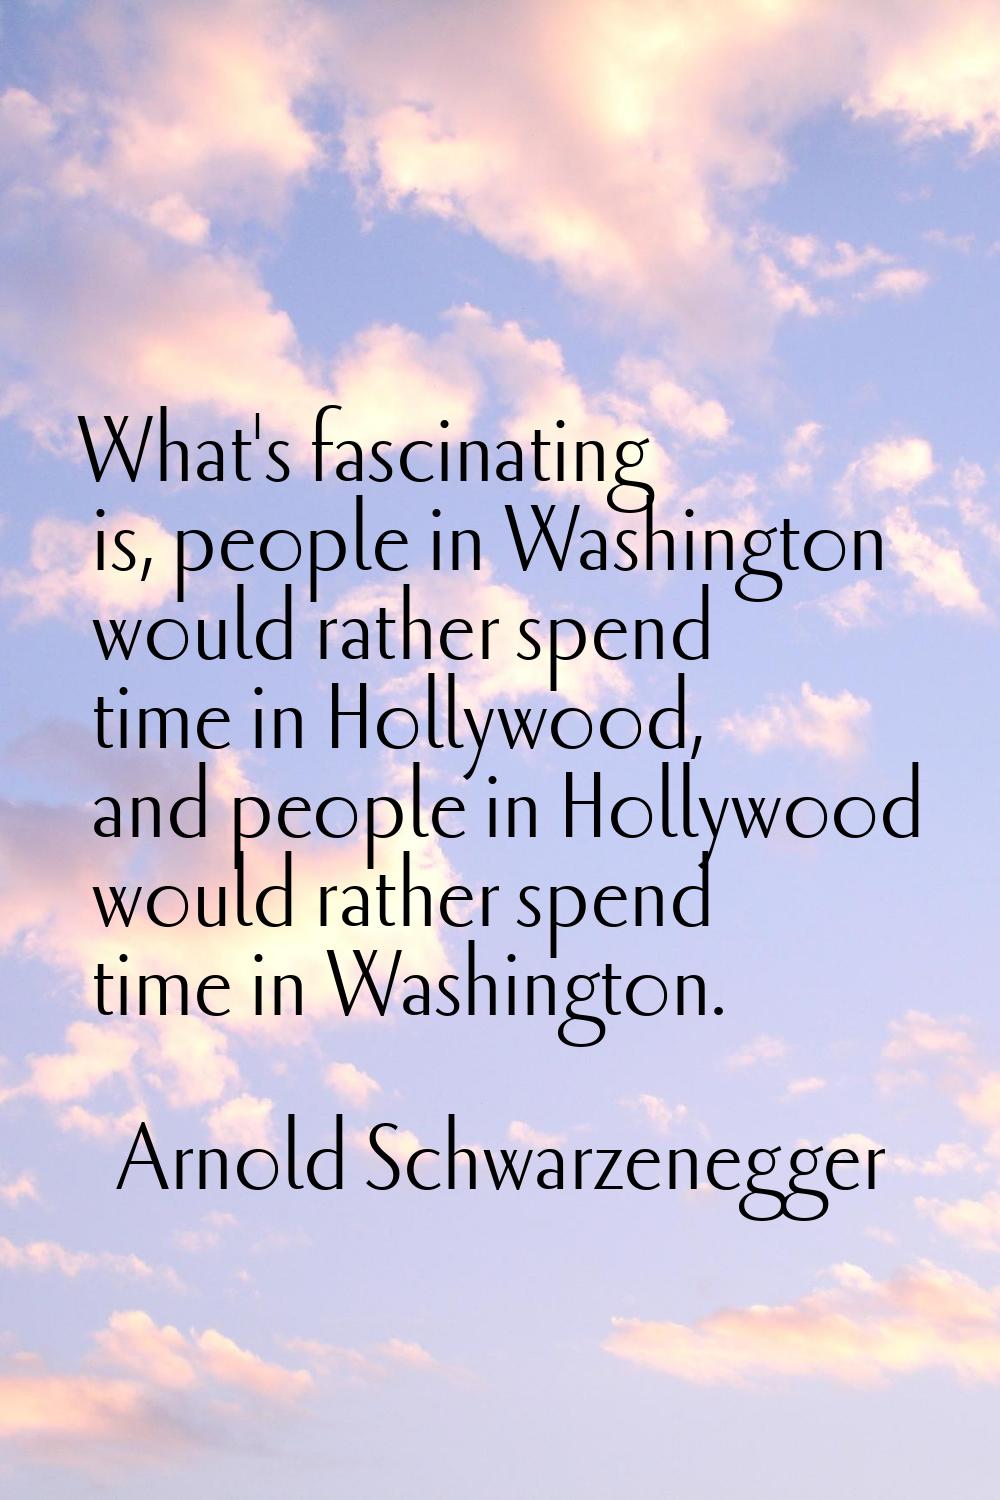 What's fascinating is, people in Washington would rather spend time in Hollywood, and people in Hol